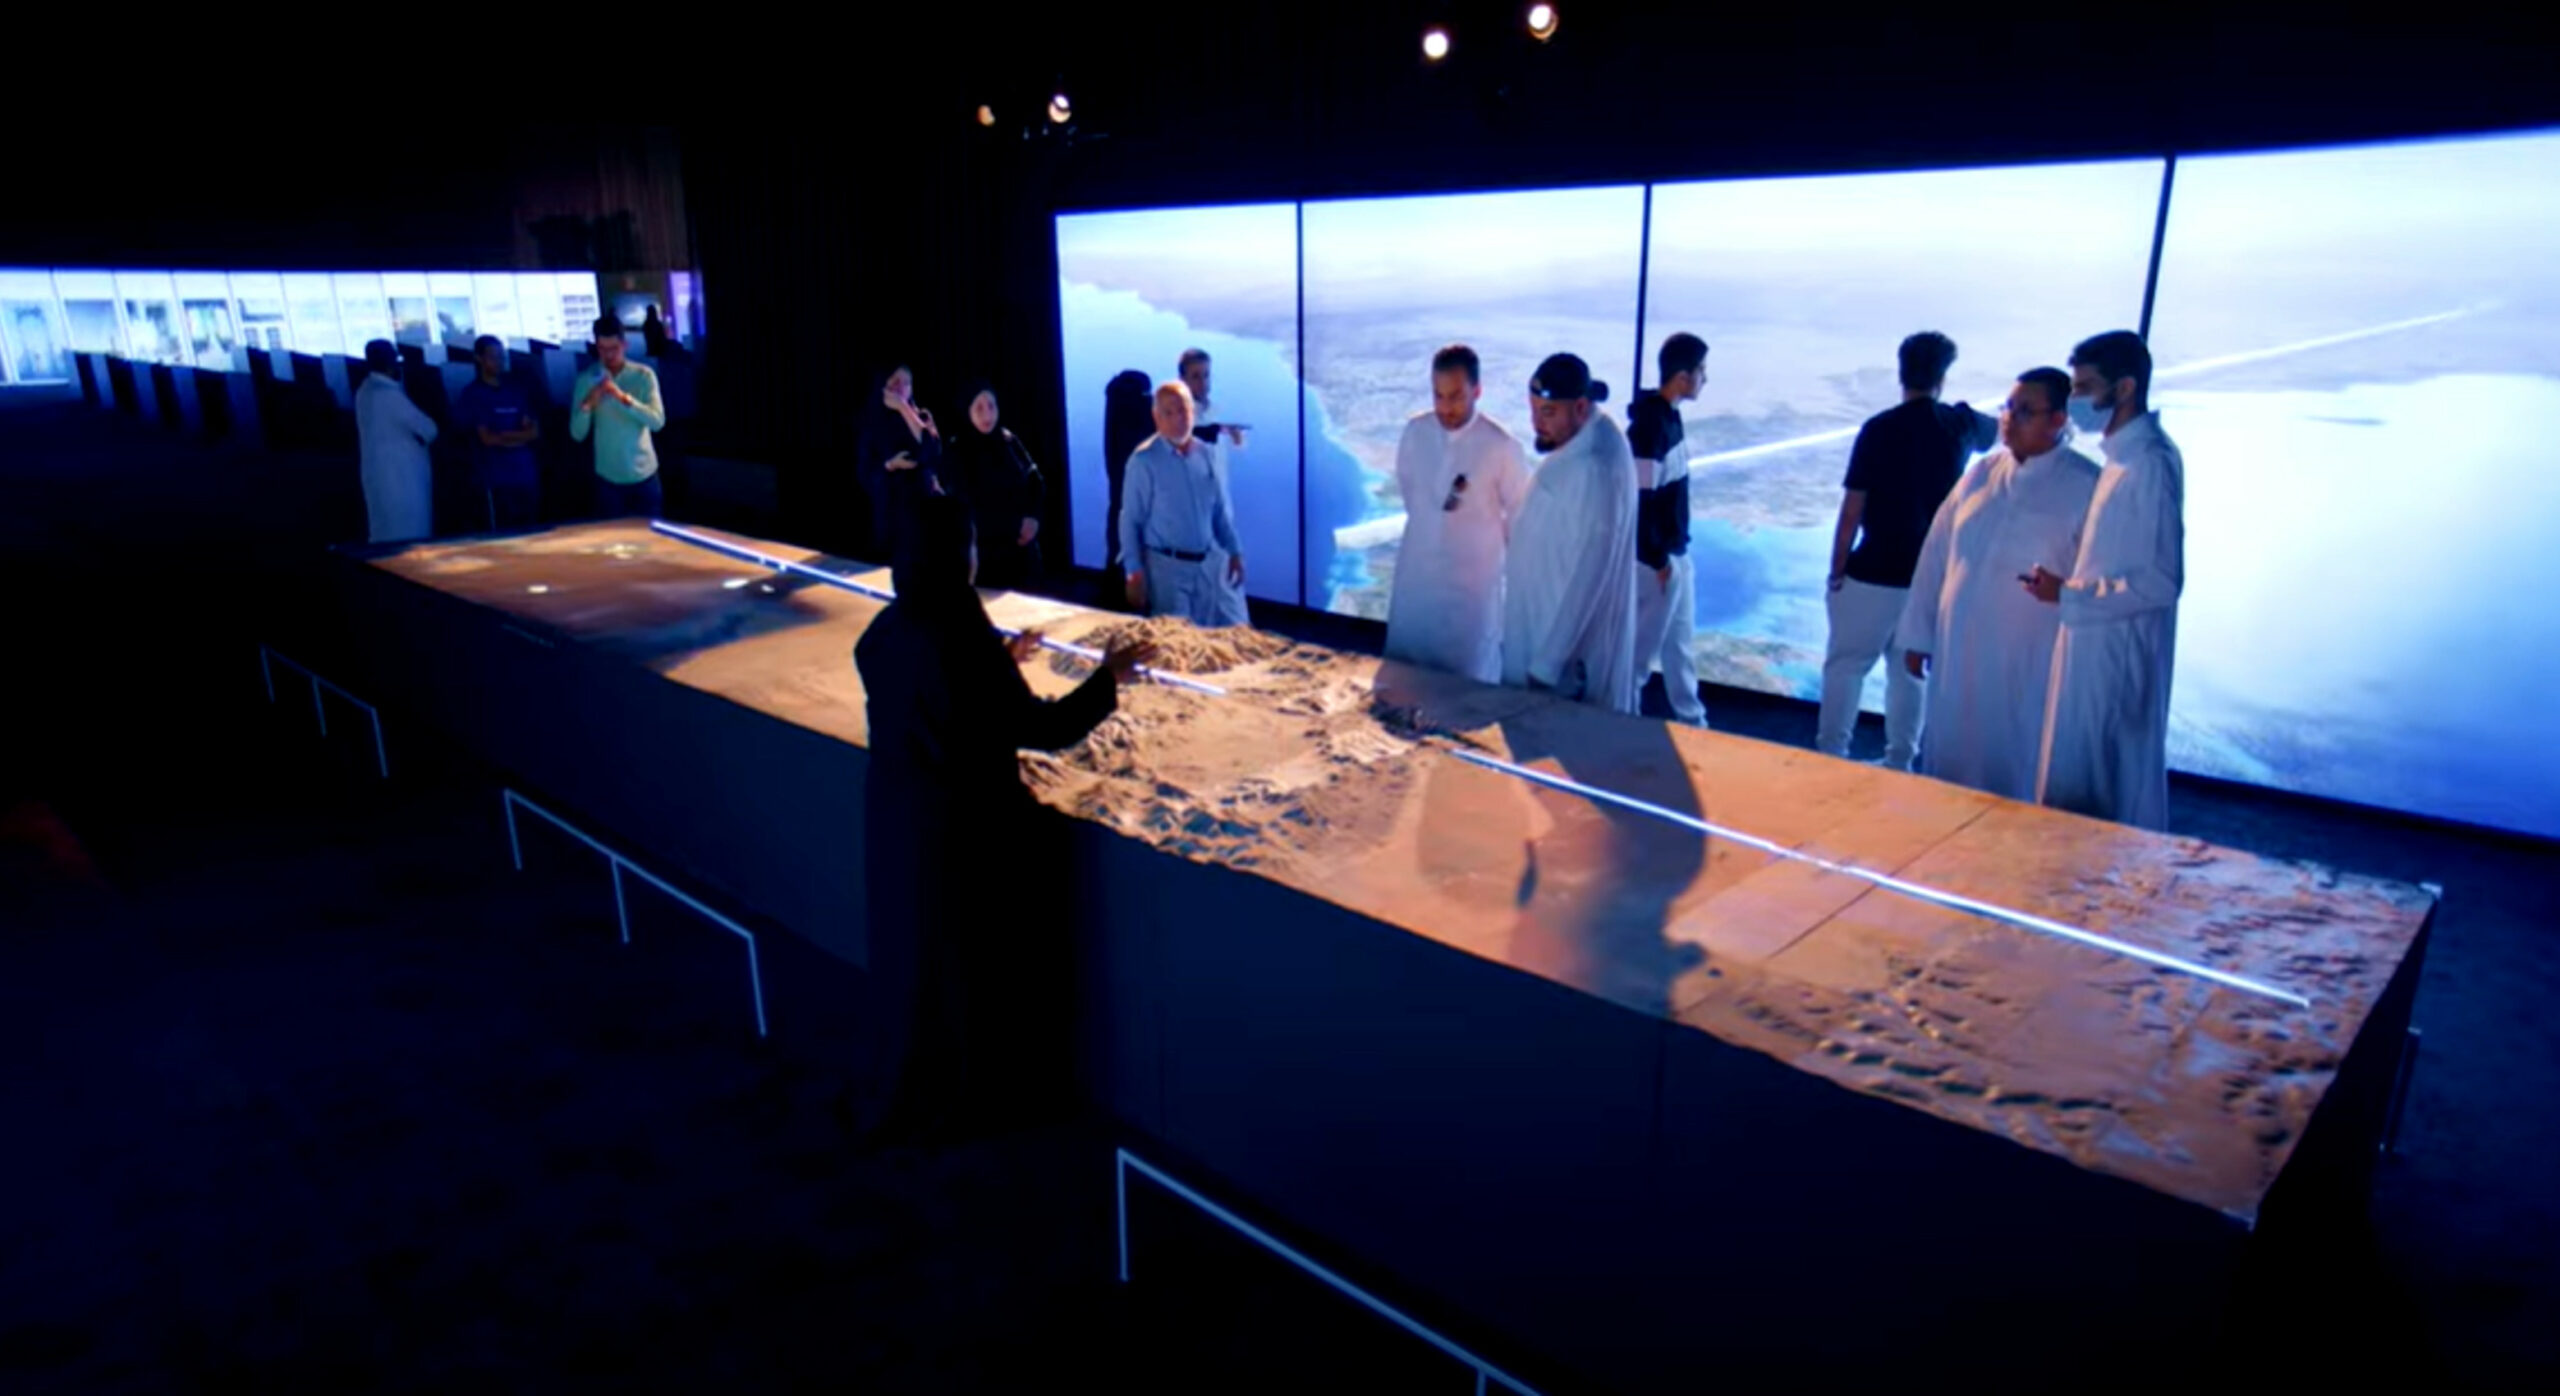 Quelques 200,000 people are expected to attend The Line Experience Exhibition in Riyadh.